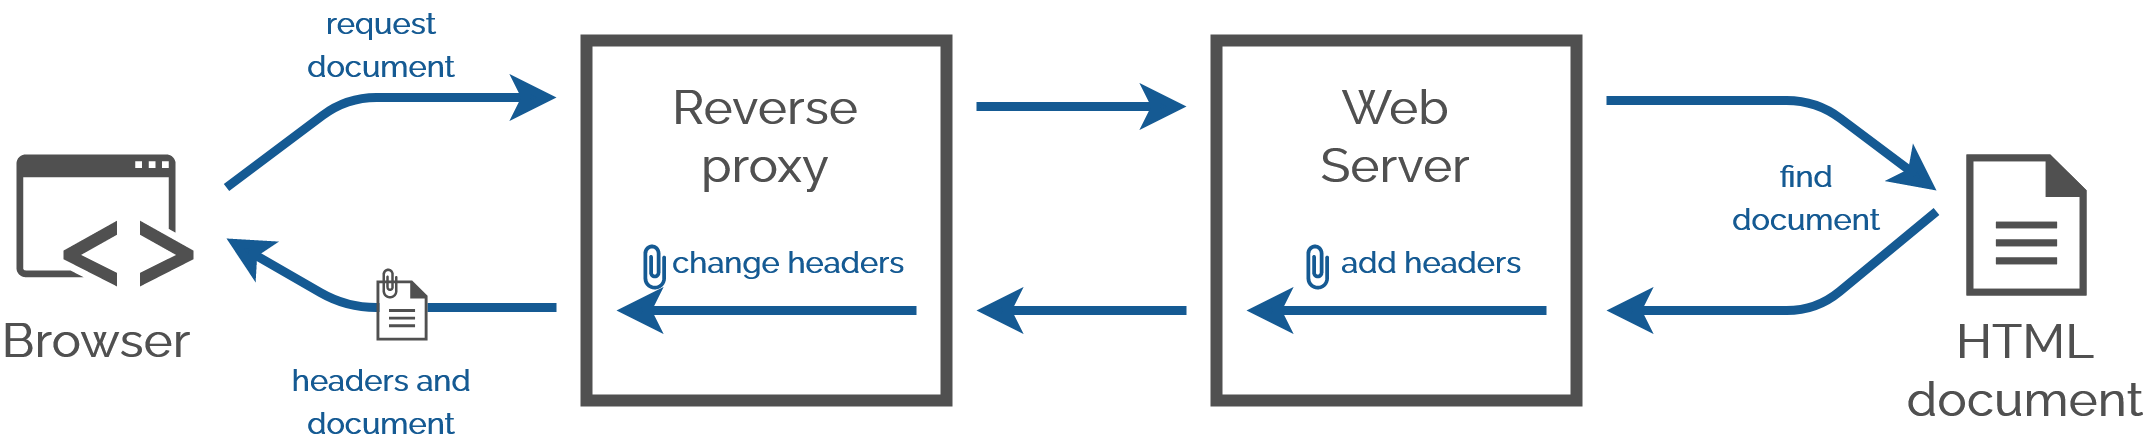 Diagram showing a reverse proxy server modifying the headers set by an upstream web server in response to a request by a web browser.